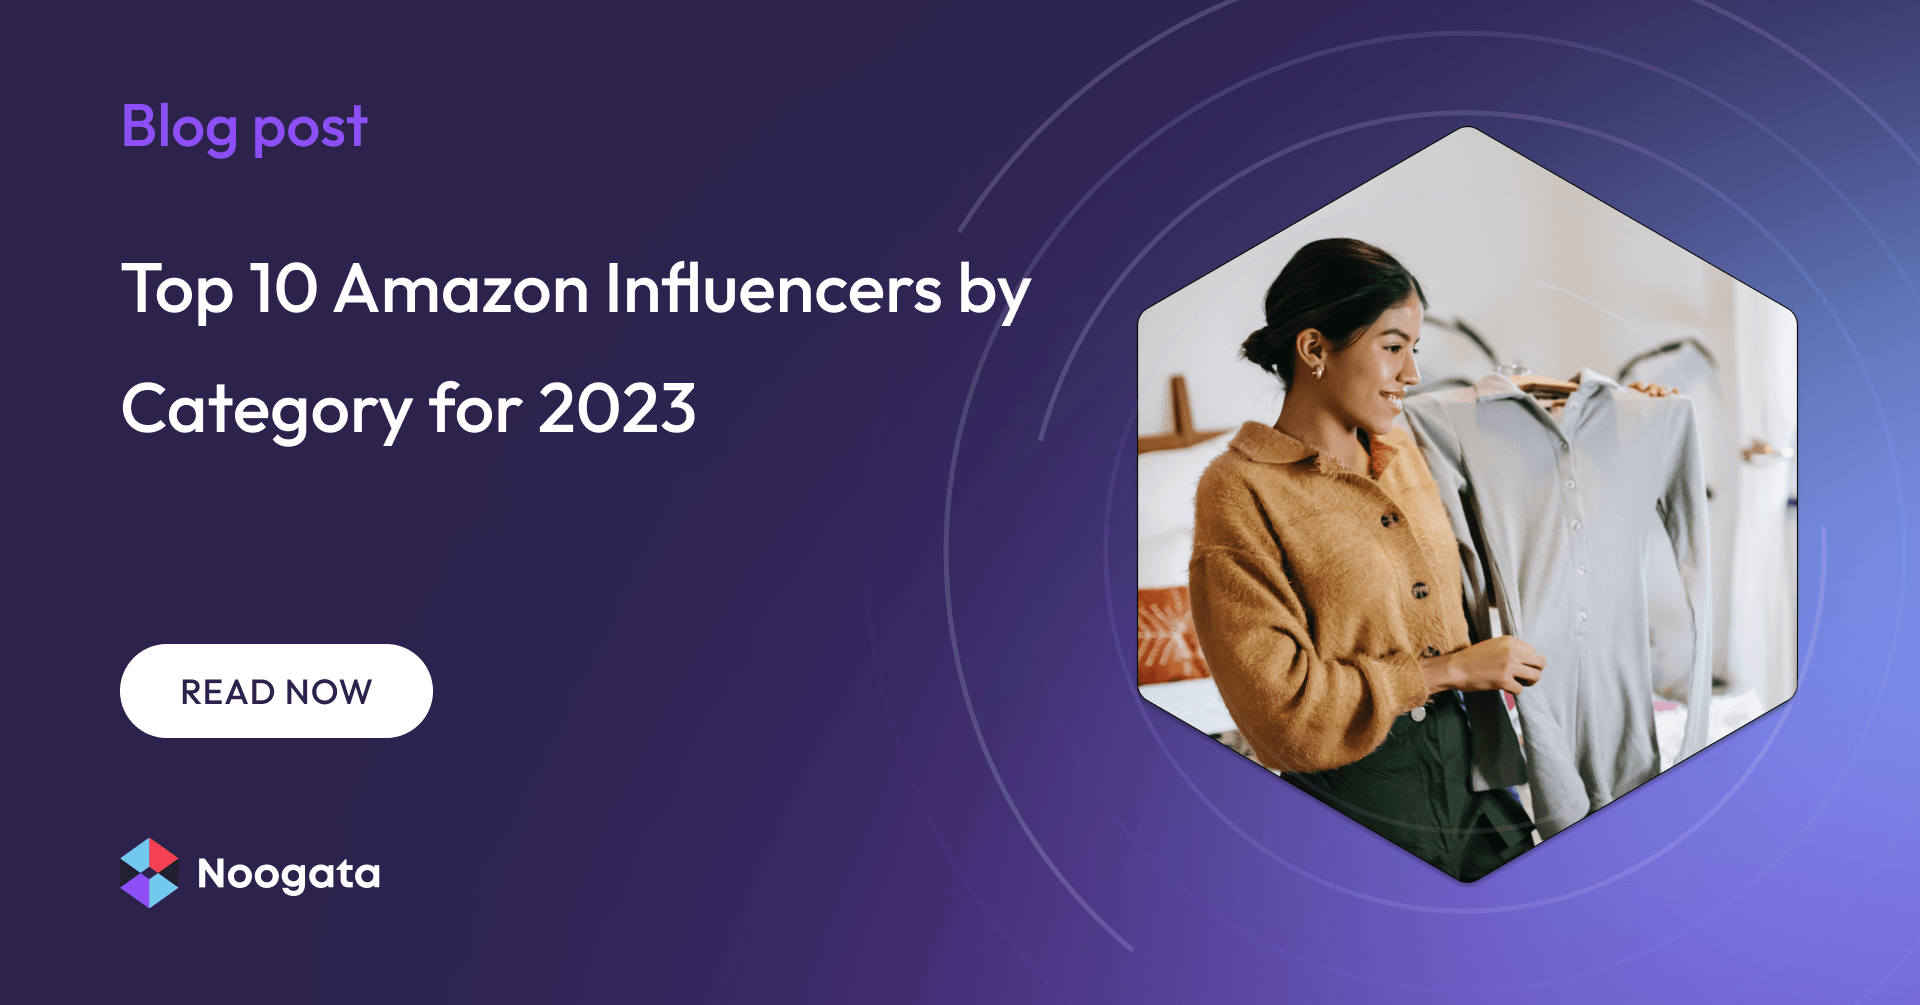 Top 10 Amazon Influencers by Category for 2023